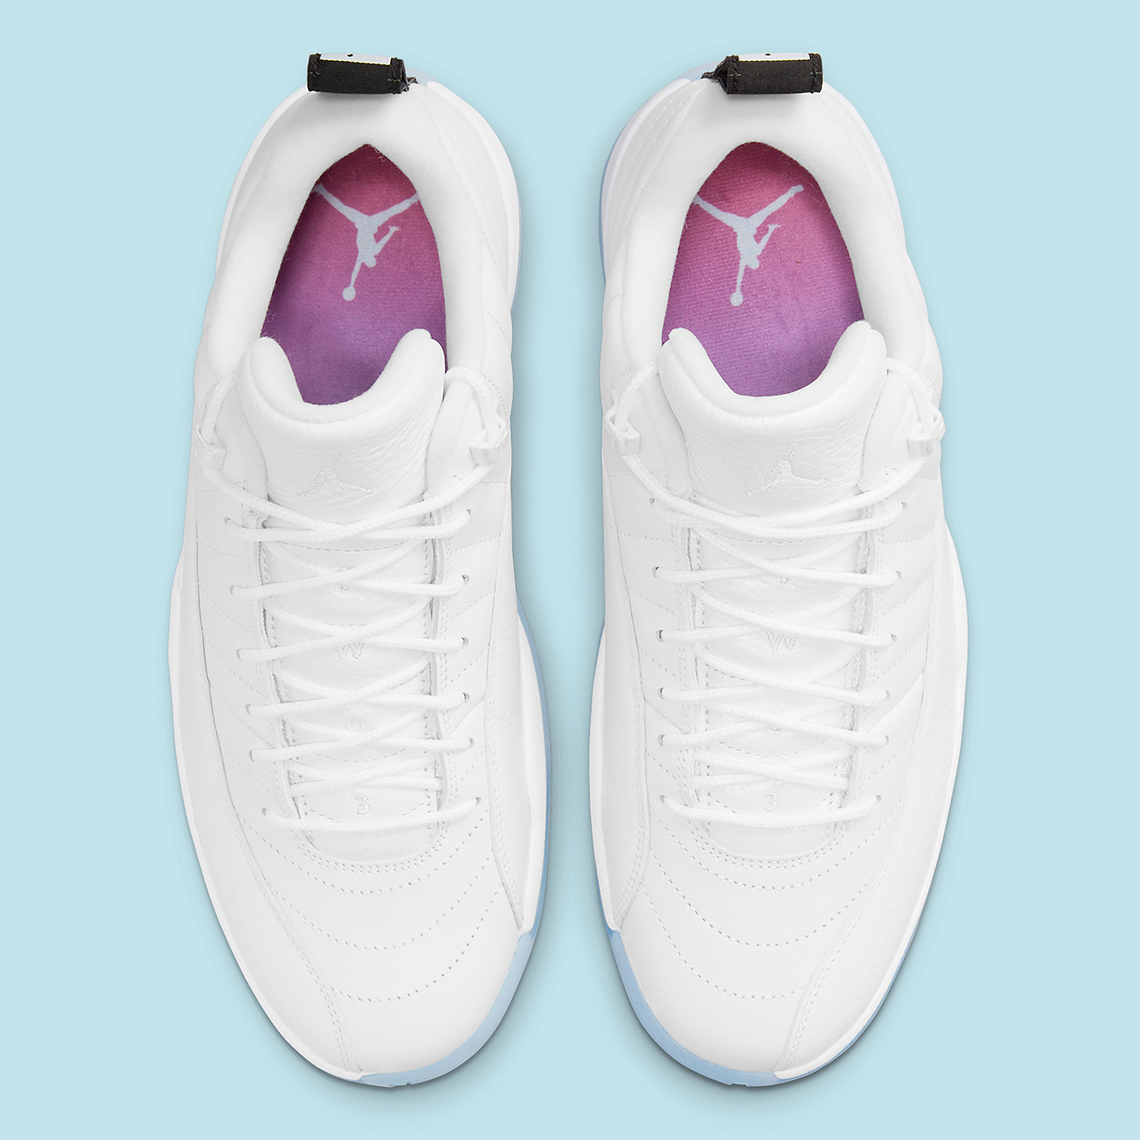 Air Jordan 12 Low Easter (Restock) Review and on foot .with special  guest appearance 